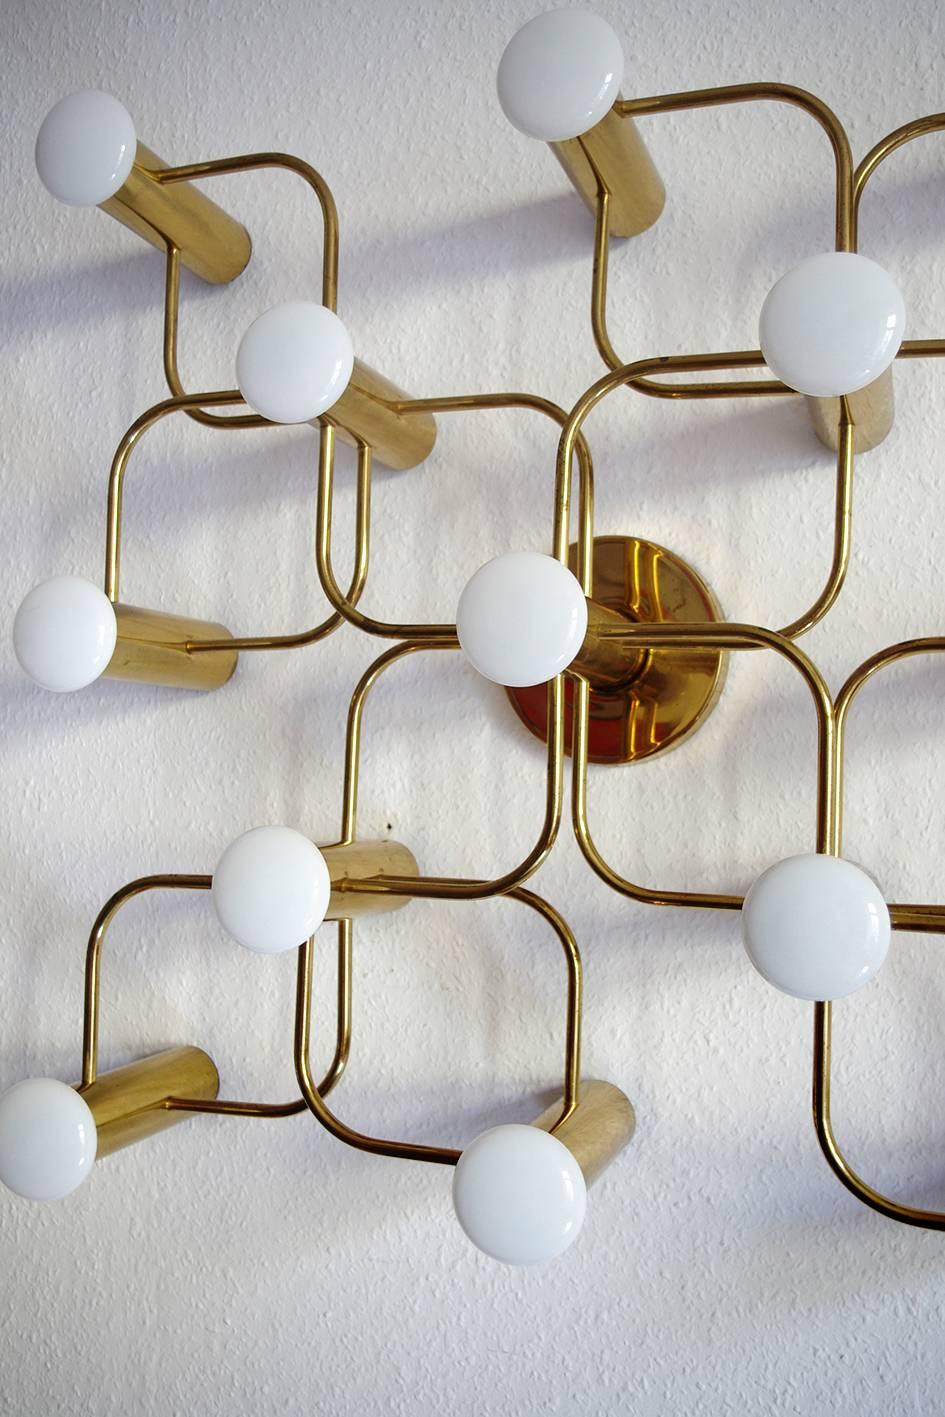 Minimalist Spectacular Sculptural Ceiling or Wall Flush Mount Chandelier by Leola, 1960s